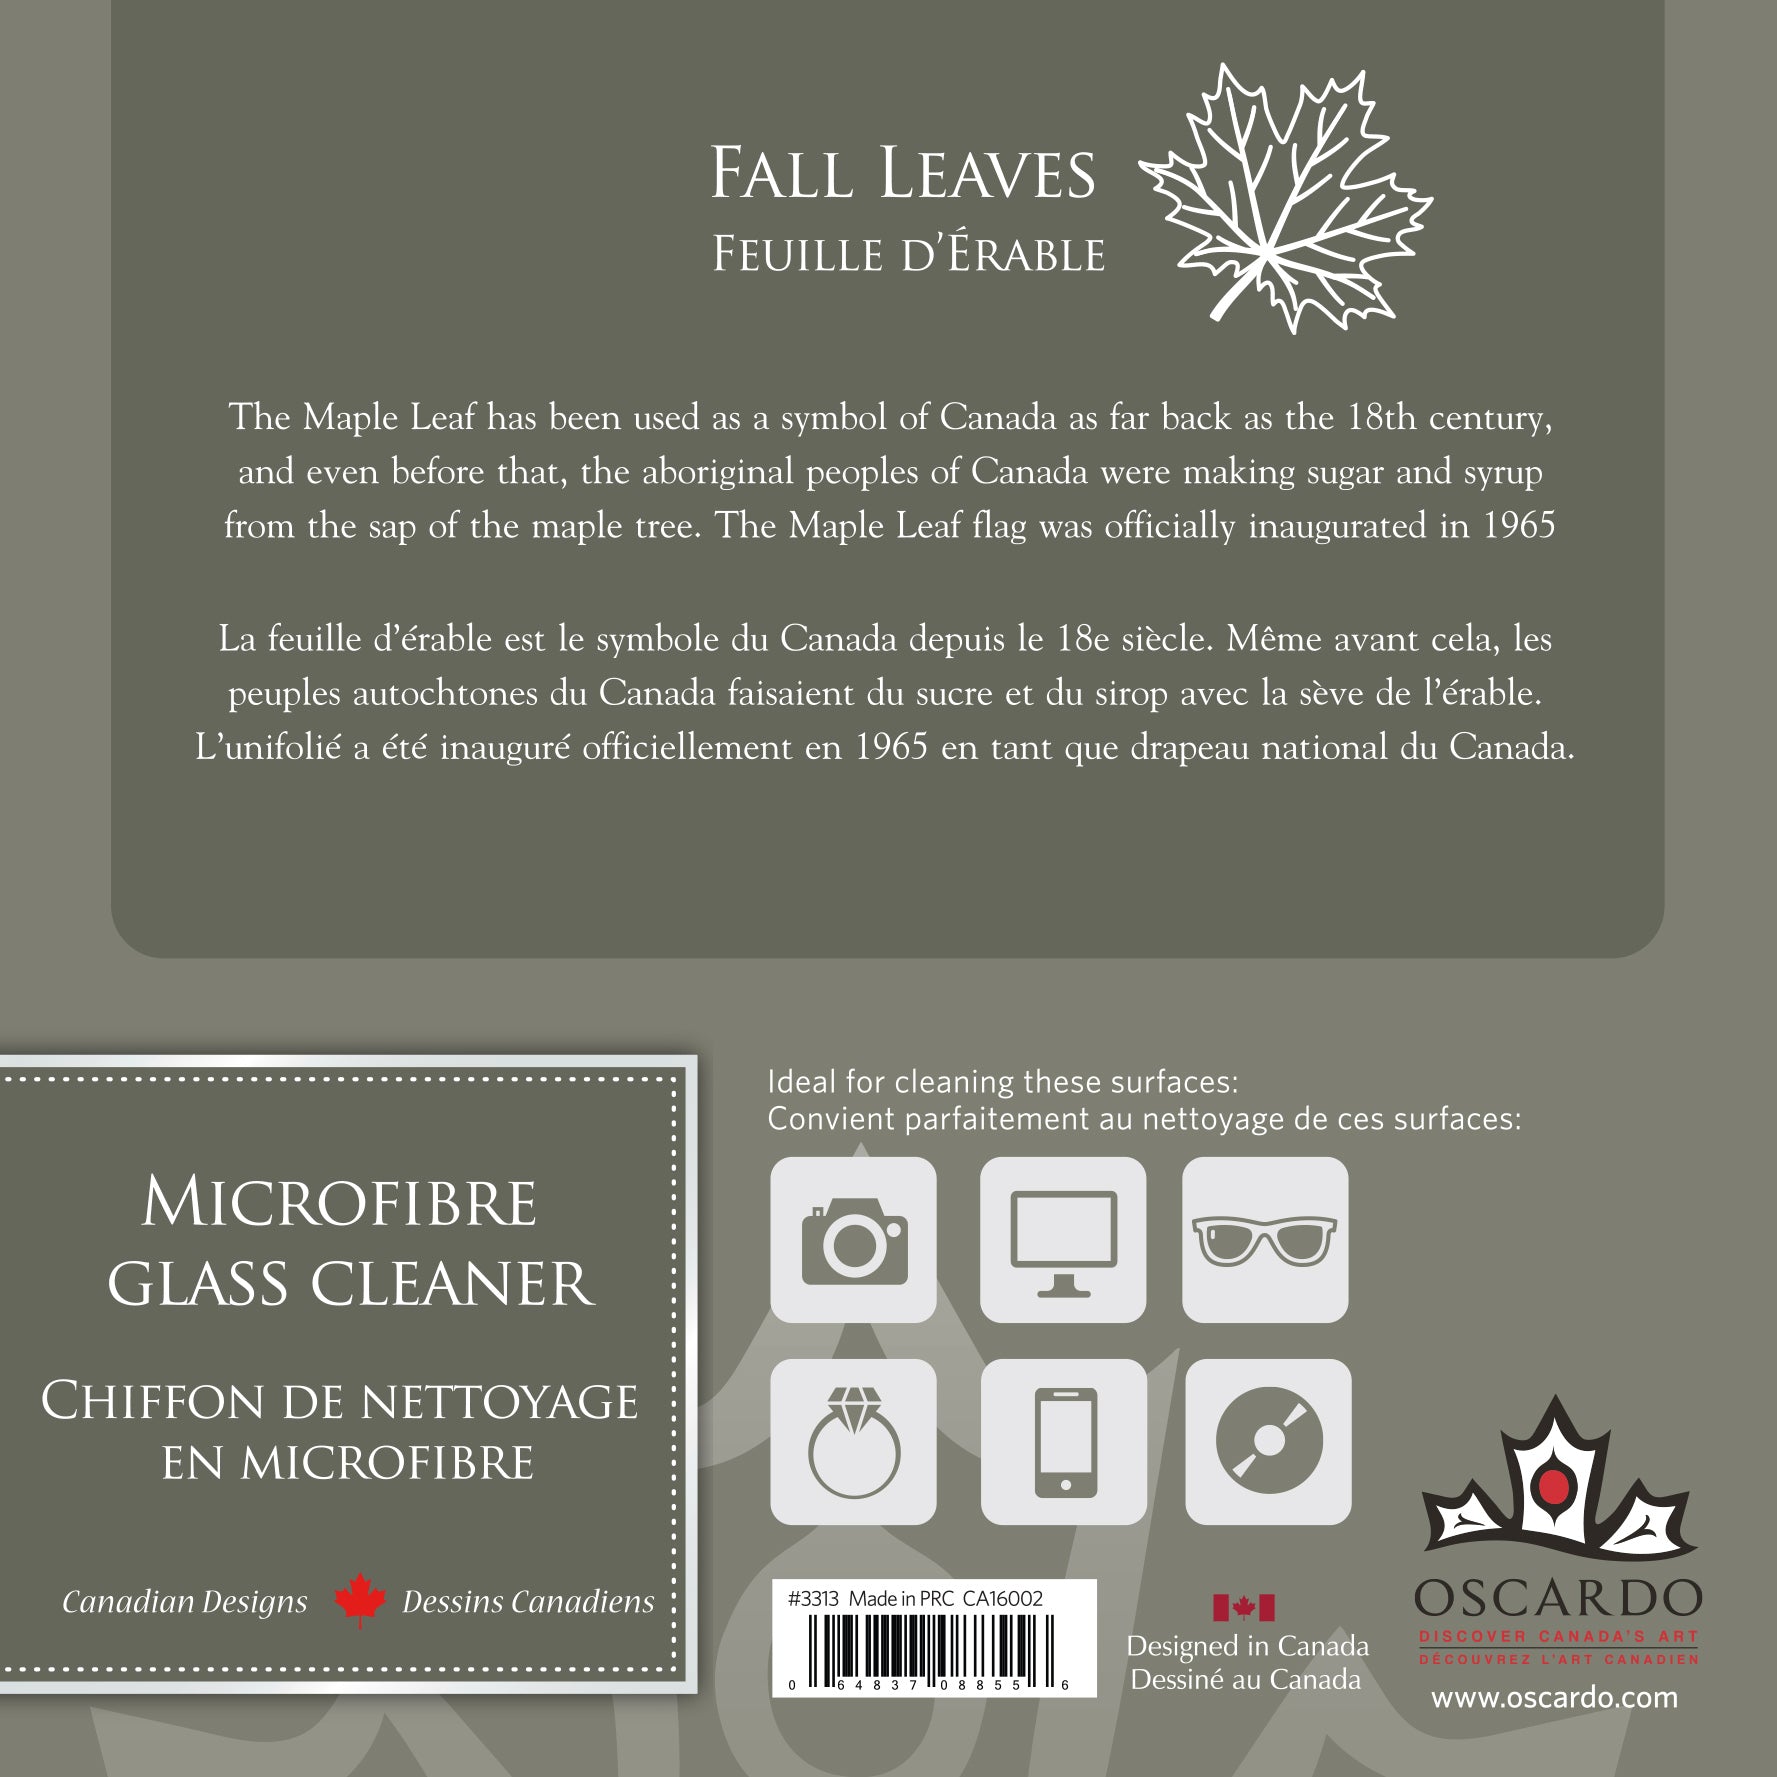 Fall Leaves Microfibre Glass Cleaner